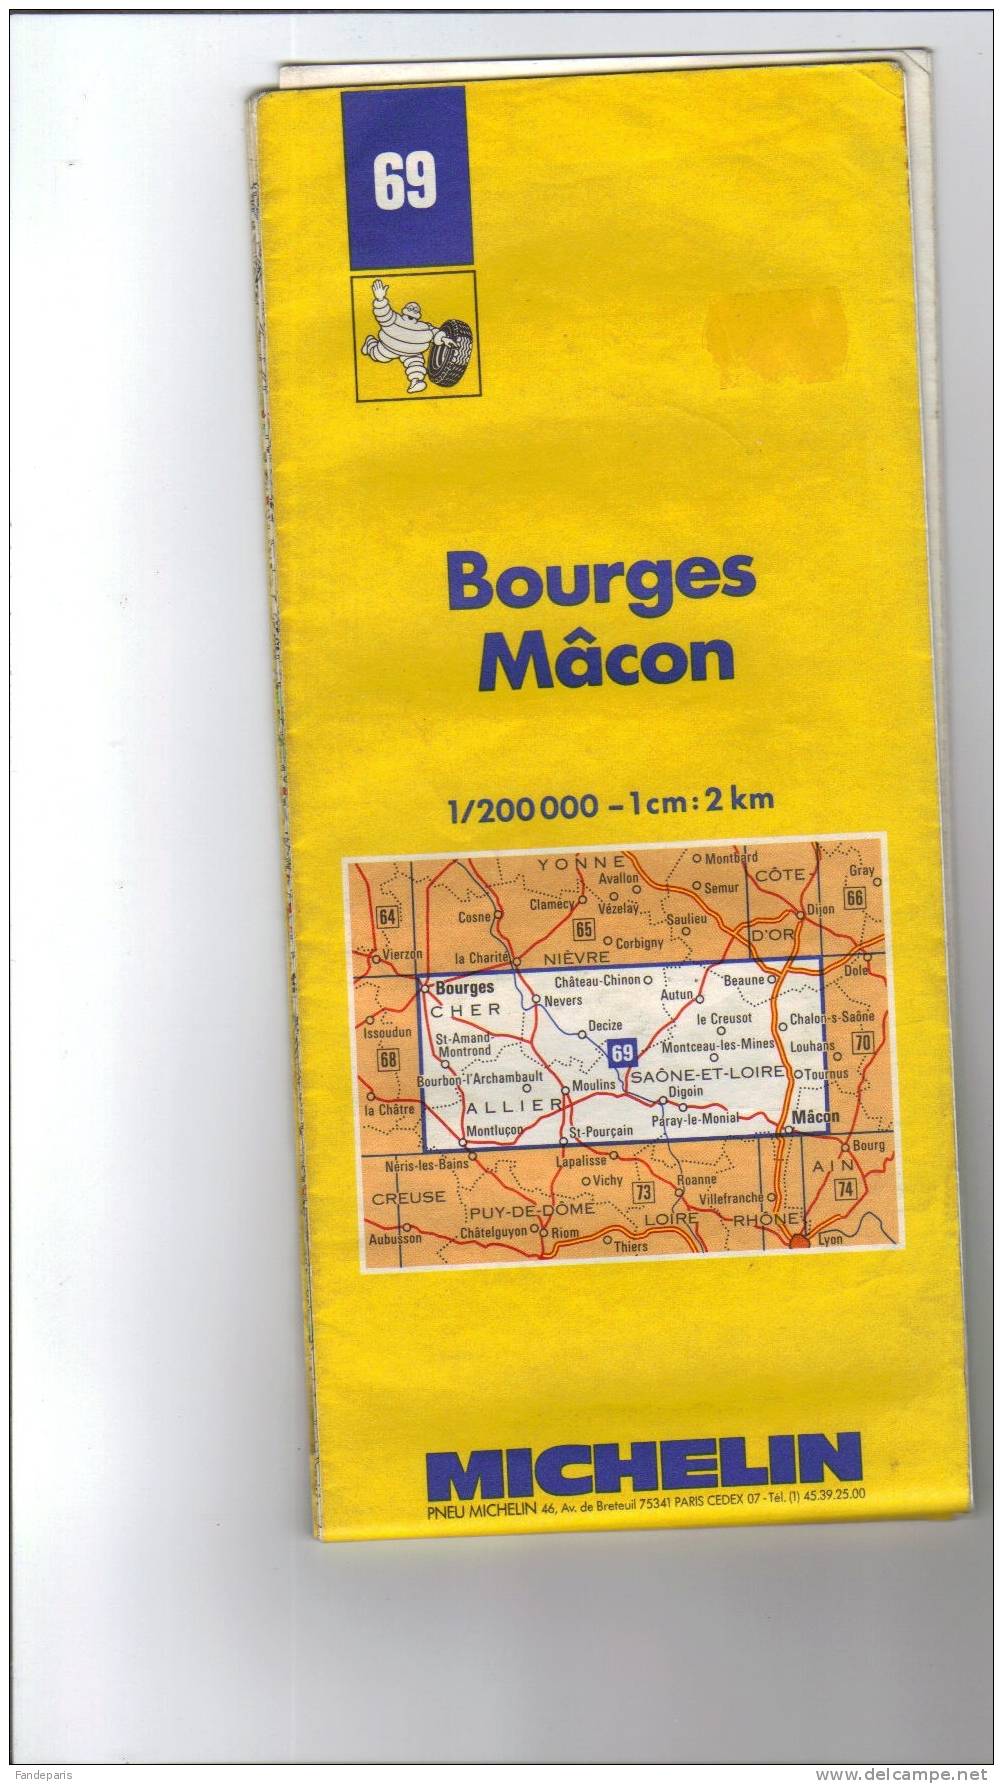 CARTES ROUTIERES  // FRANCE  //   BOURGES - MACON  / MICHELIN  / N° 69 - Strassenkarten